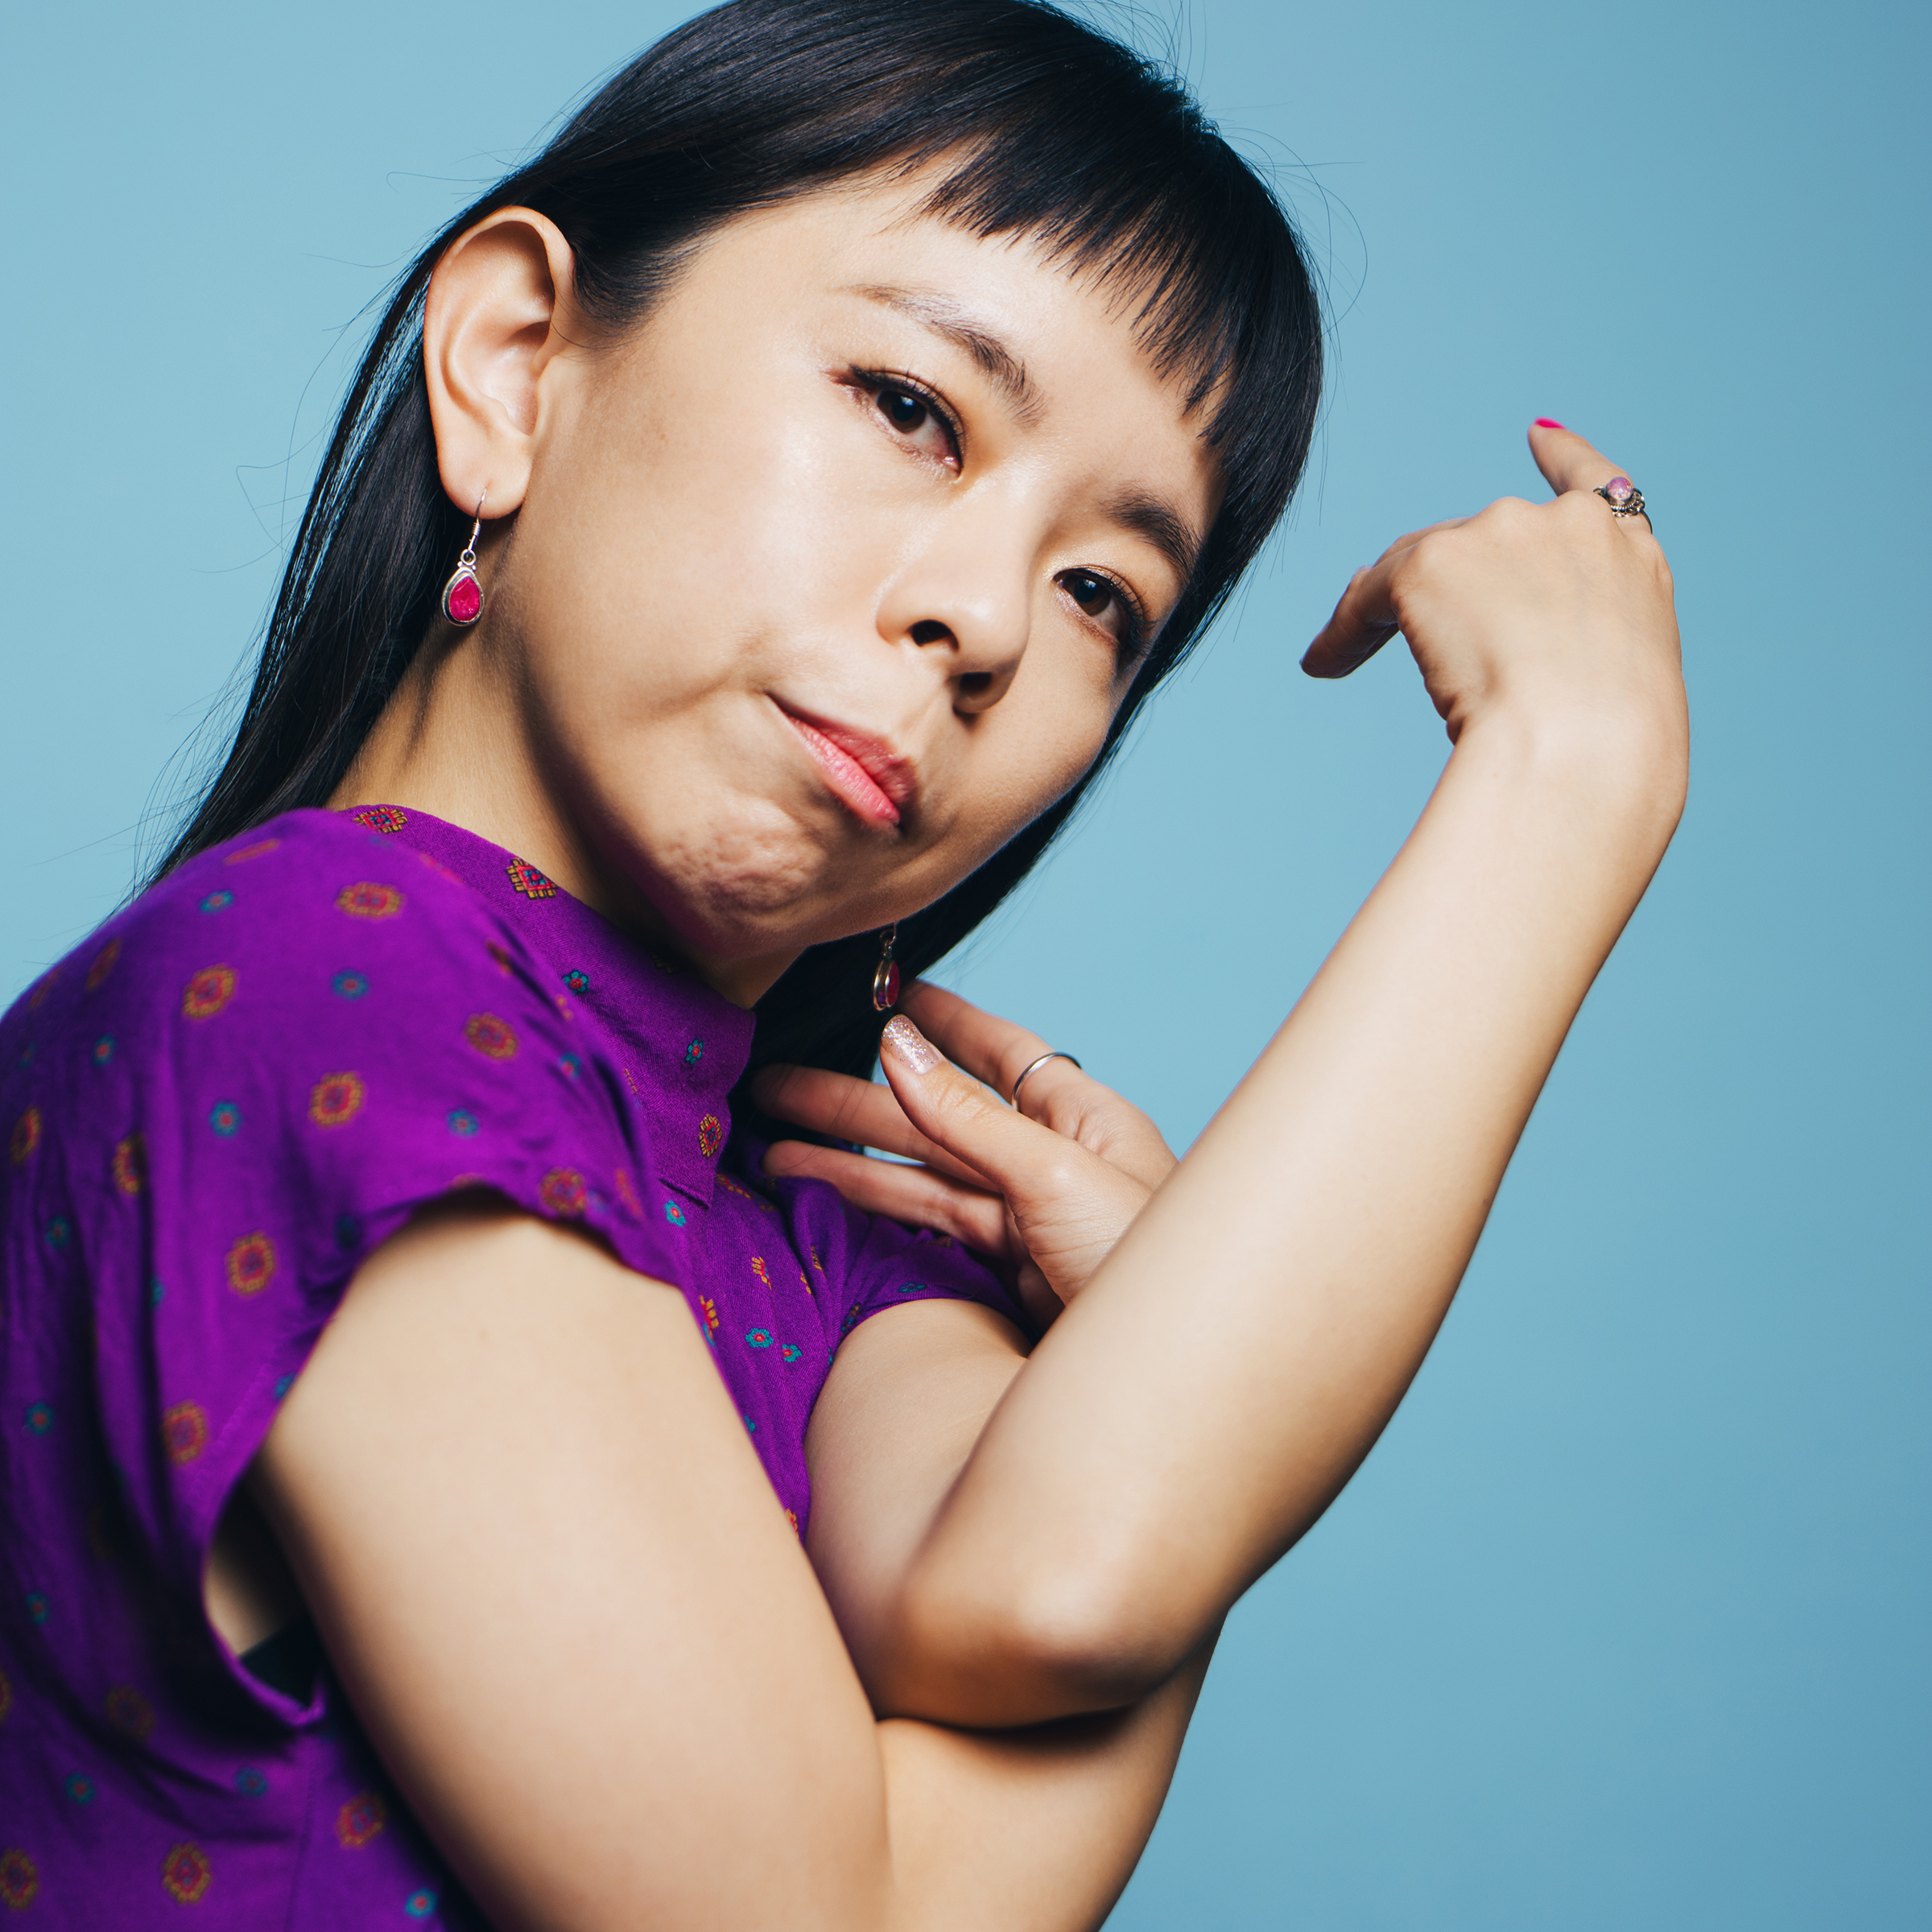 Portrait of Megumi Kokuba in a purple shirt, weaving her arms up close to her chest while she tilts her head to look at the camera